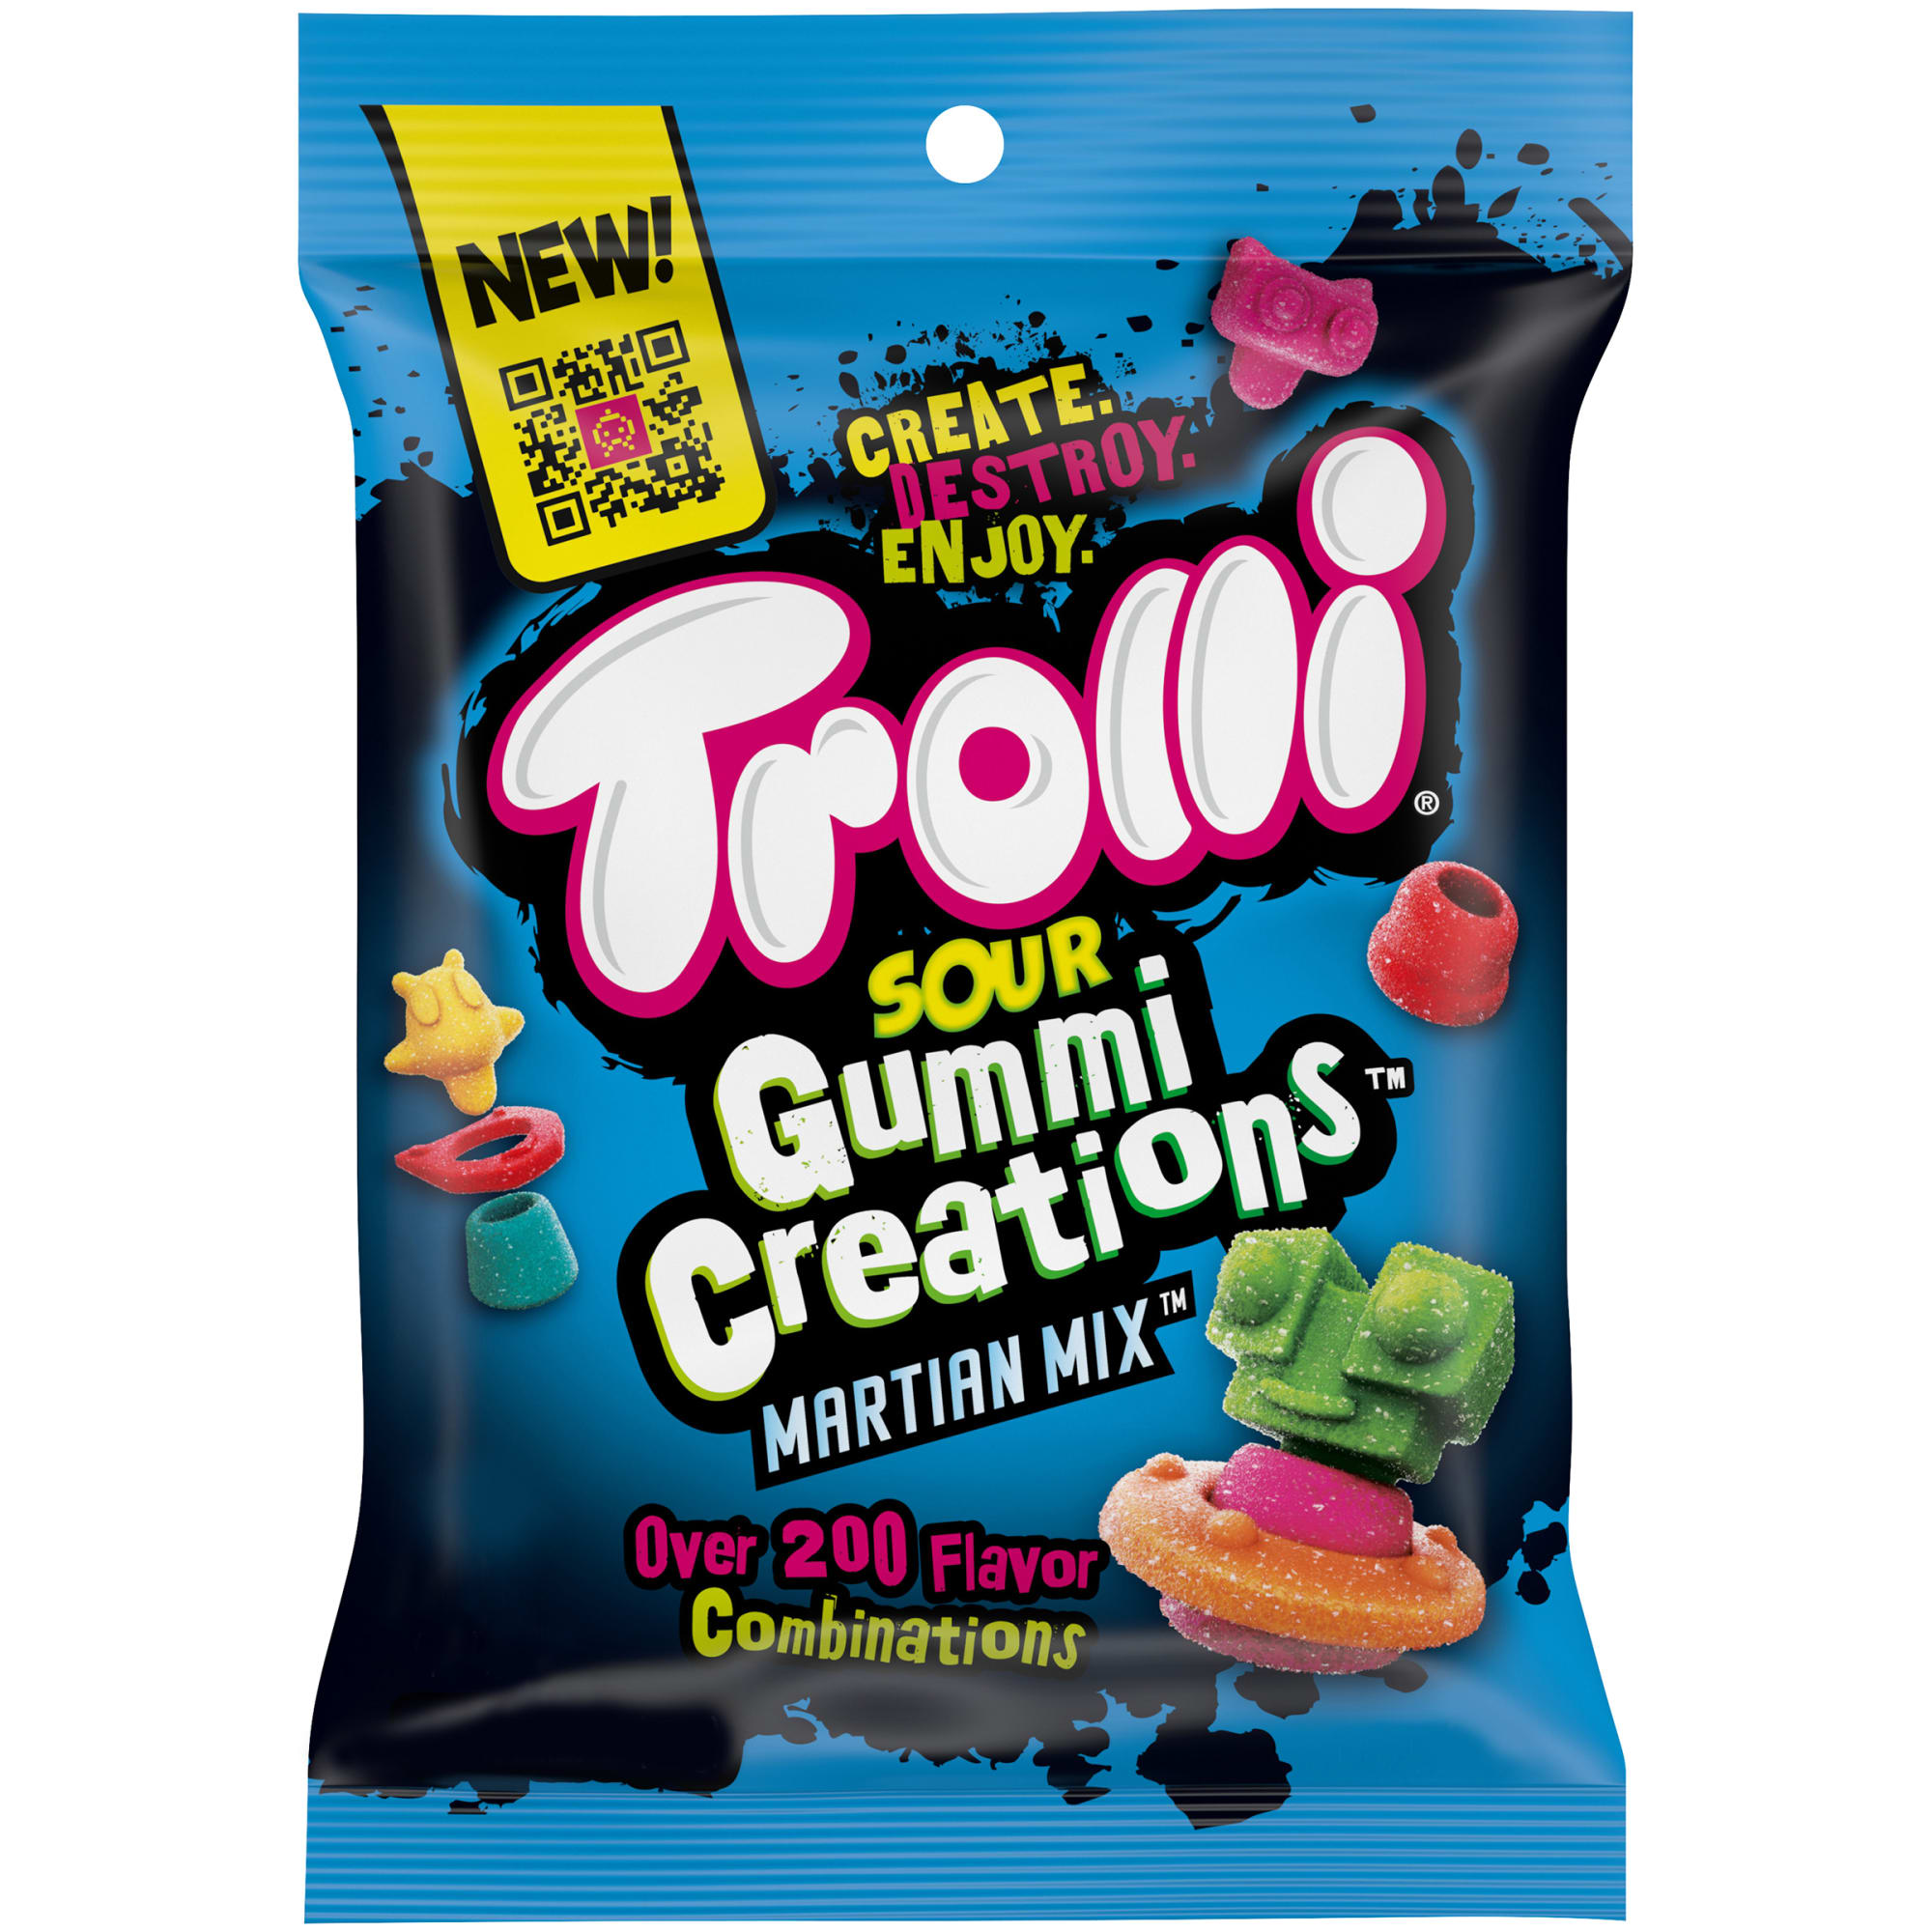 Trolli brings out of this world creations to its buildable candy